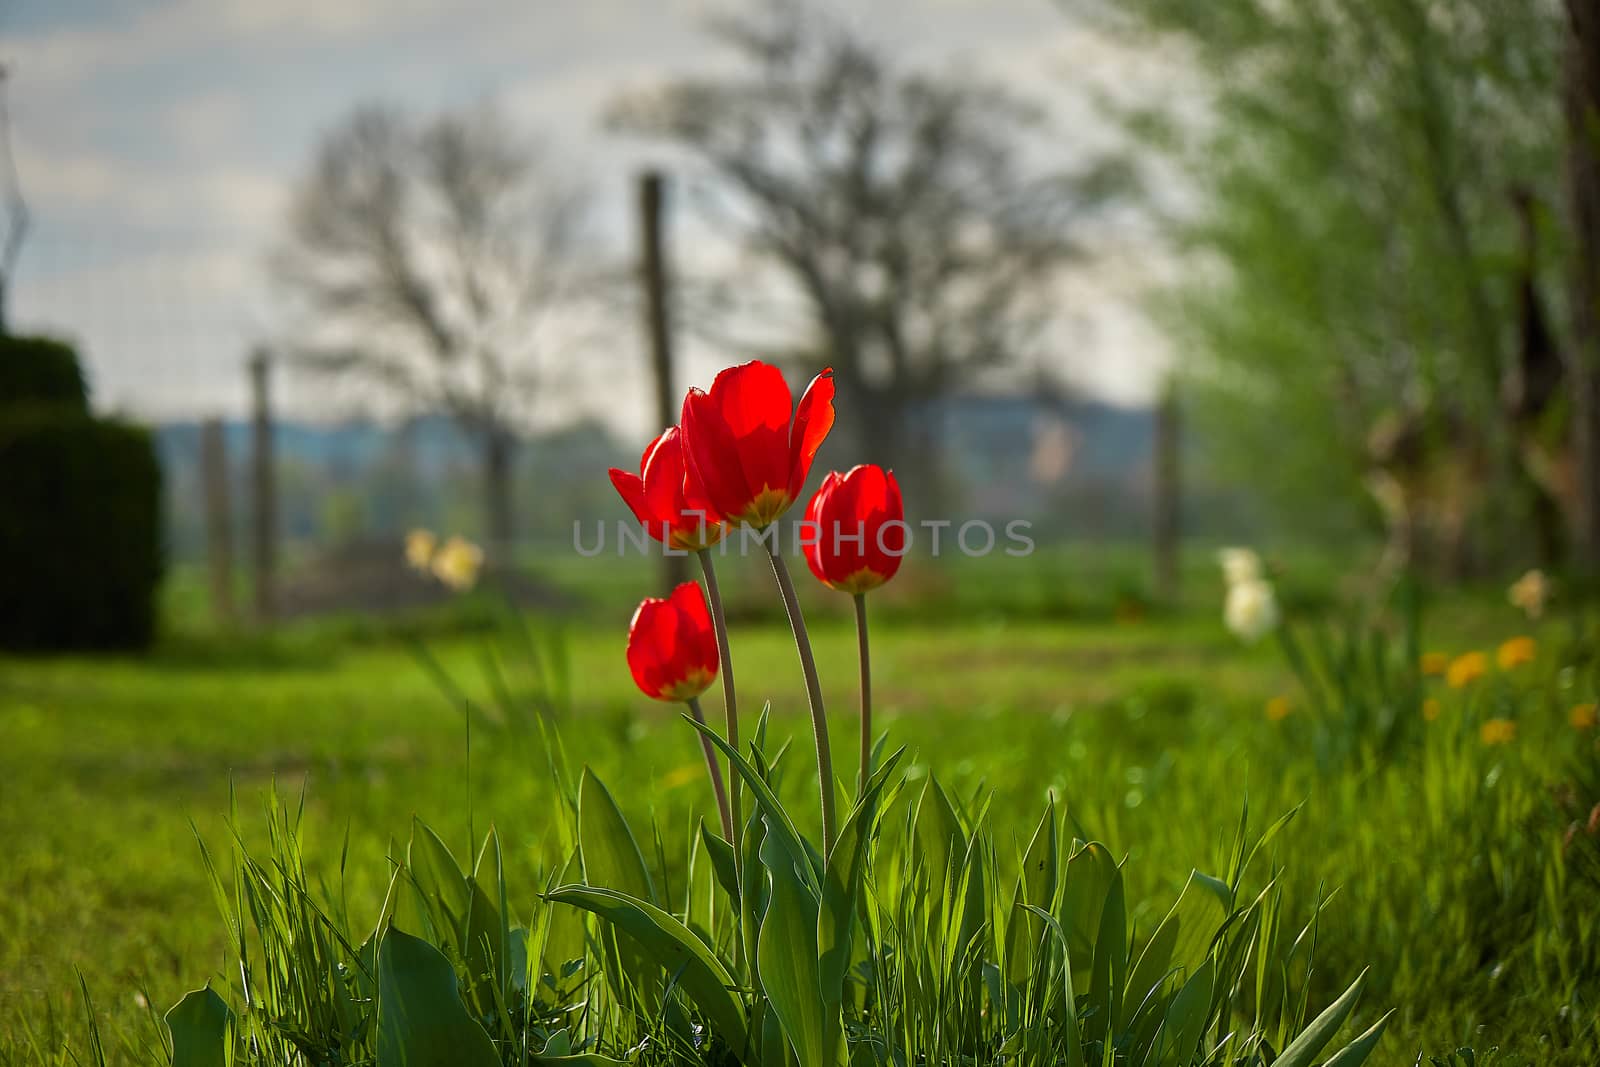 Group of red tulips in the park by Sirius3001